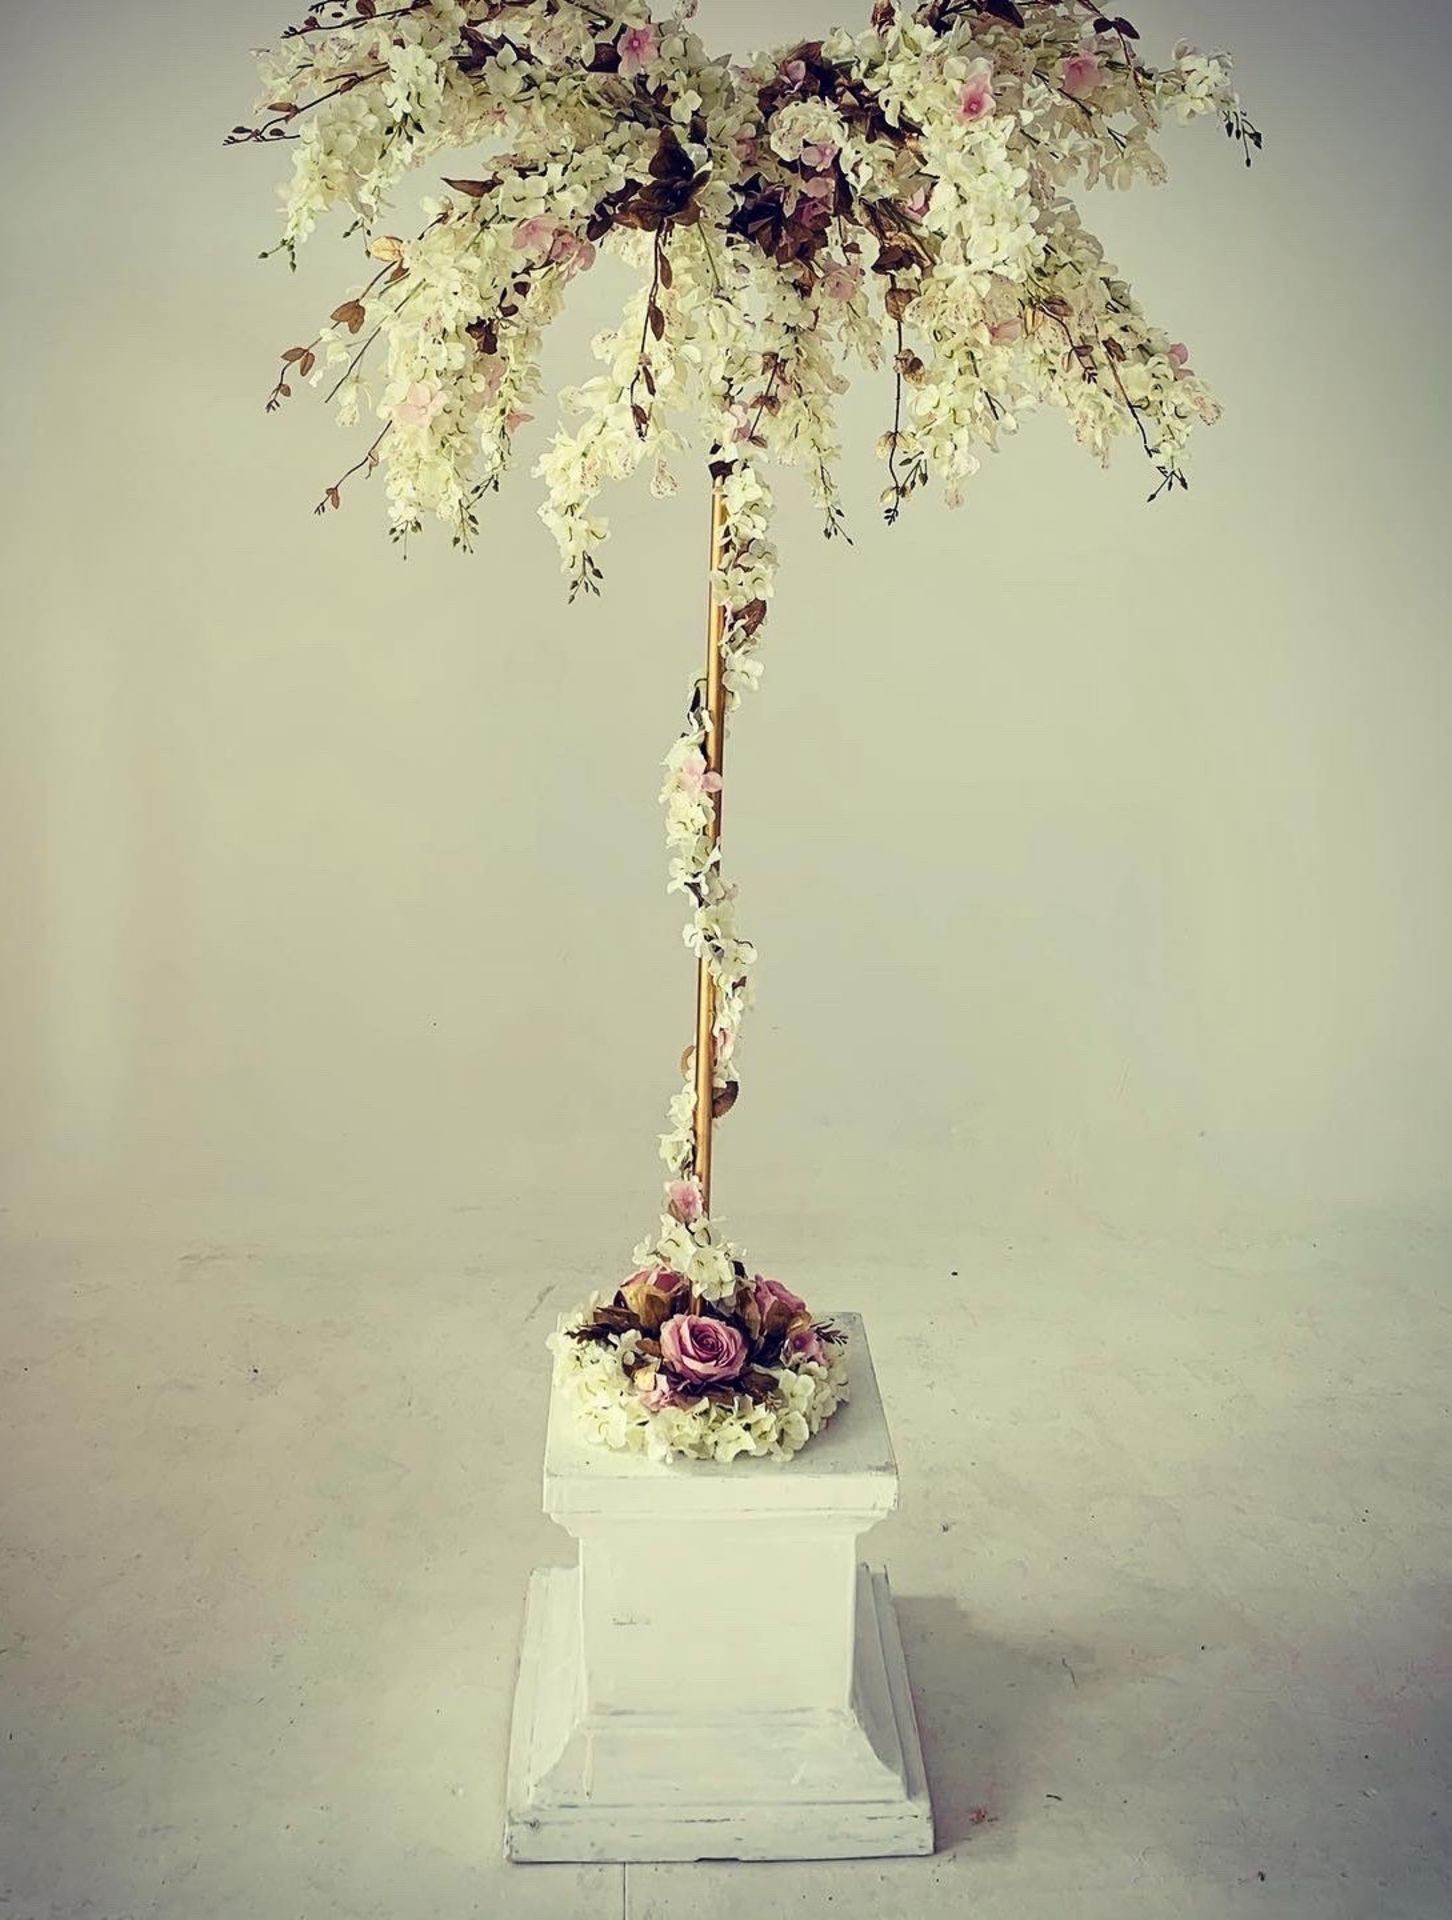 1 x Ivory Floral Tree - One-off Bespoke Example - Dimensions: Approx. 4ft - Ref: Lot 1 - CL548 -